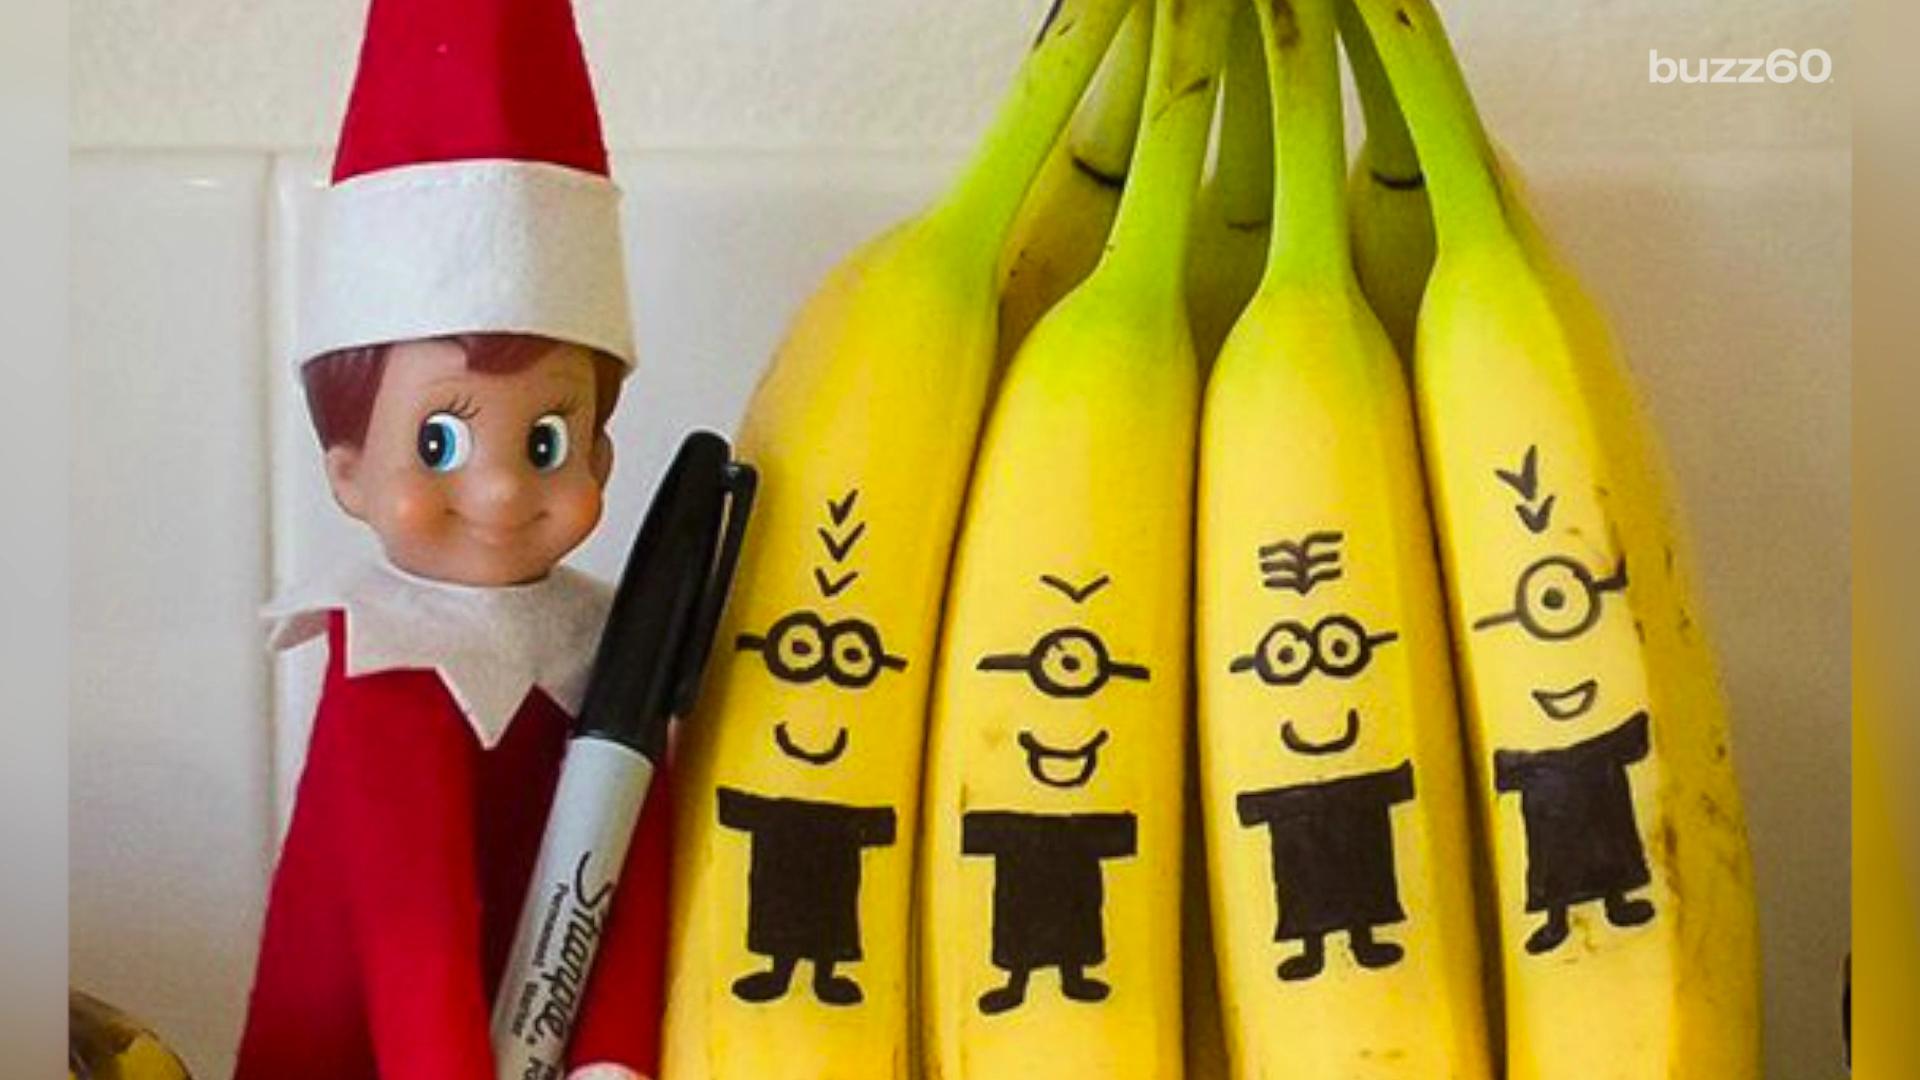 5 easy 'Elf on the Shelf' ideas that will wow your kids.